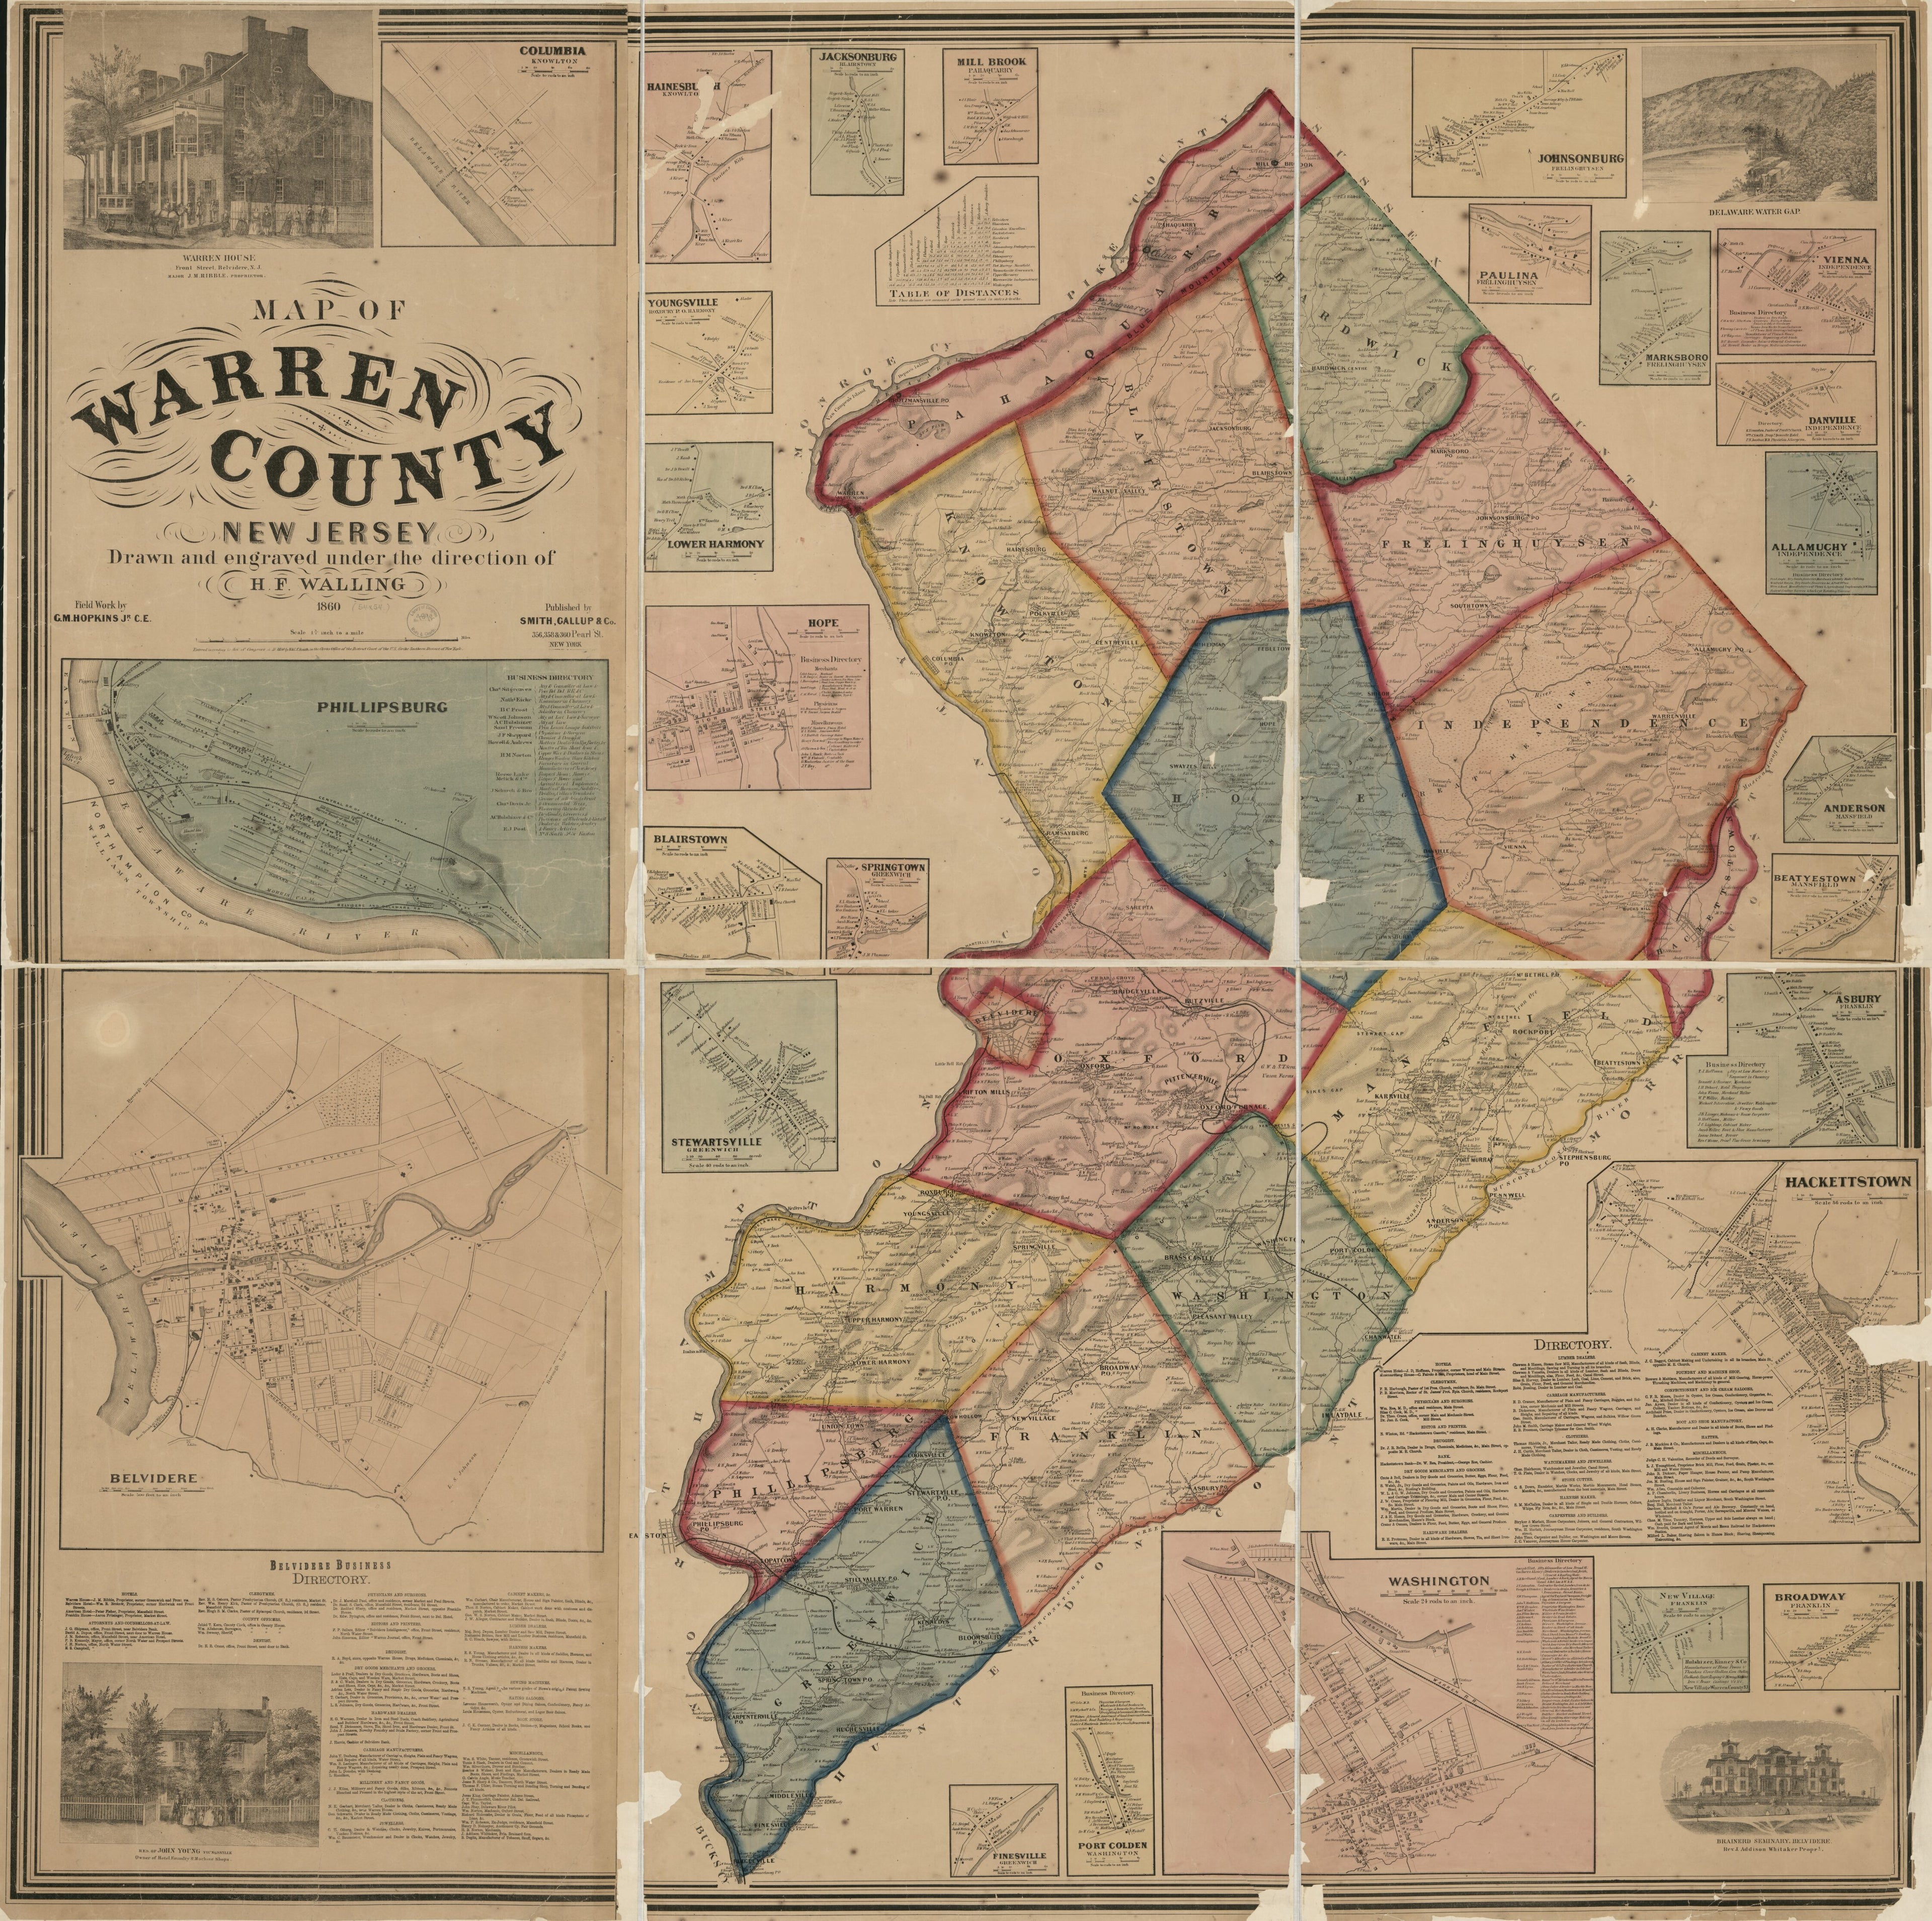 This old map of Map of Warren County, New Jersey from 1860 was created by  H. &amp; C.T. Smith (Firm), Griffith Morgan Hopkins, Gallup &amp; Co Smith, Henry Francis Walling in 1860